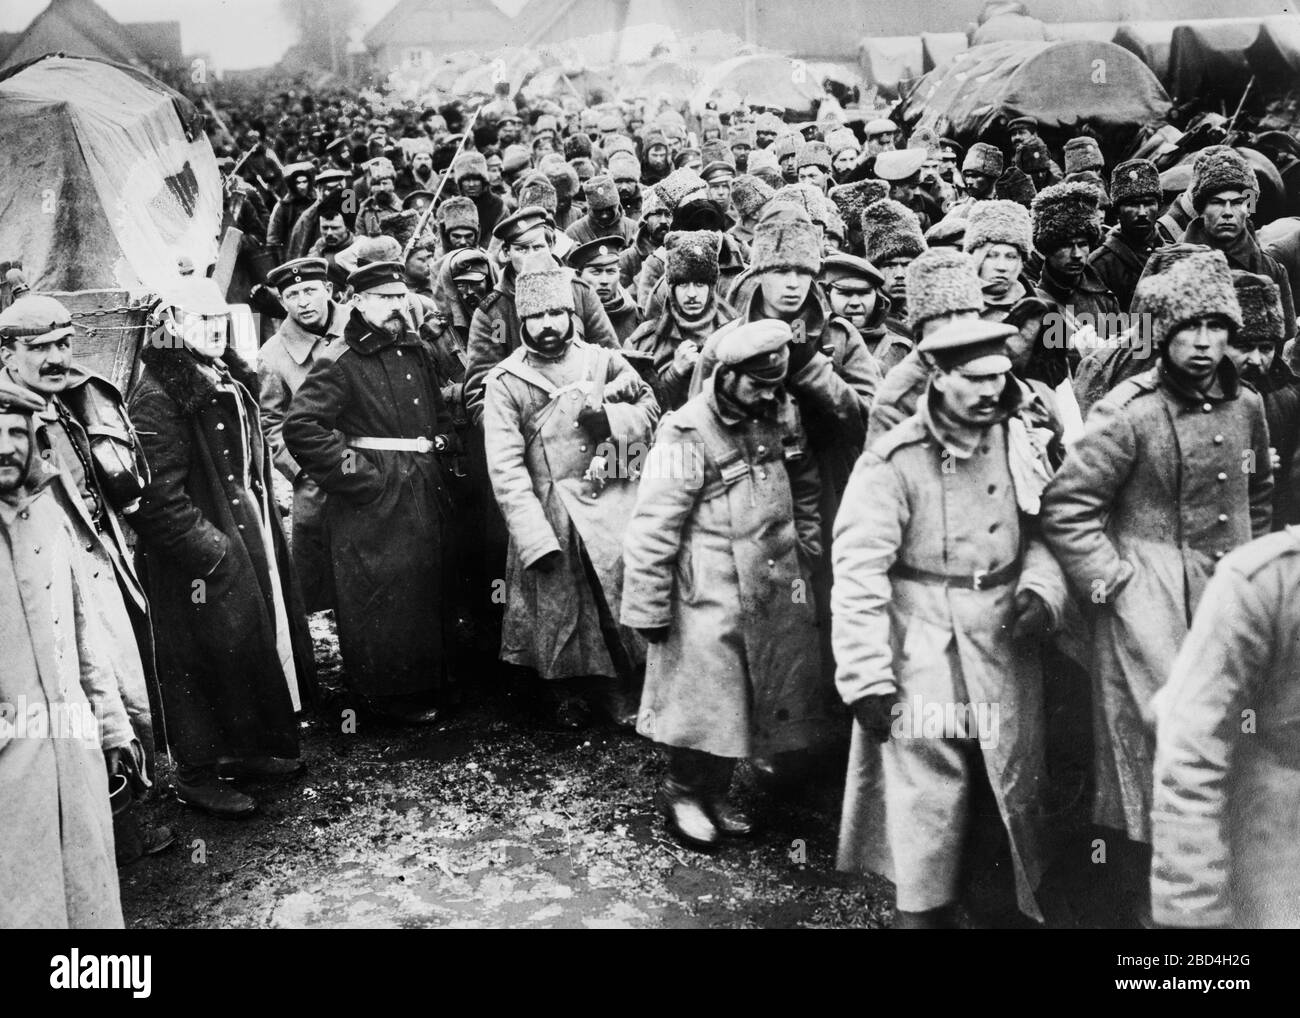 Russian prisoners of war standing outdoors during World War I ca. 1914-1915 Stock Photo